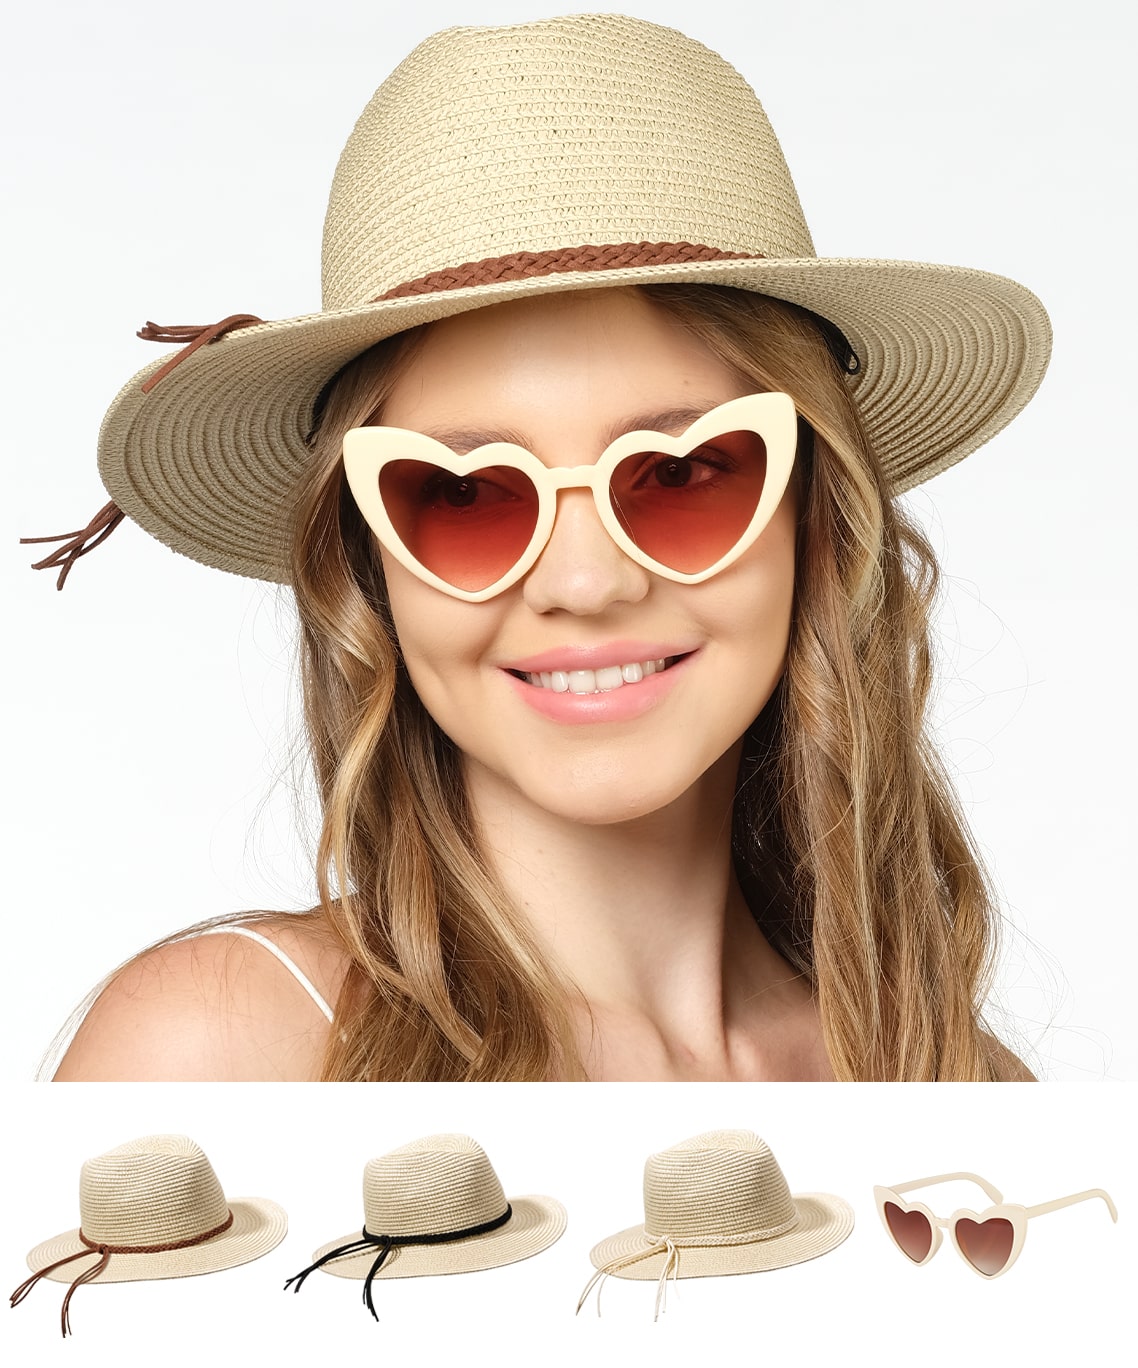 Reversible Braided Bee Beach Straw Panama Bucket Hat Straw For Women Hip  Hop, Fishing, And Outdoor Activities With Wide Brim From Andrewgoudelock,  $19.94